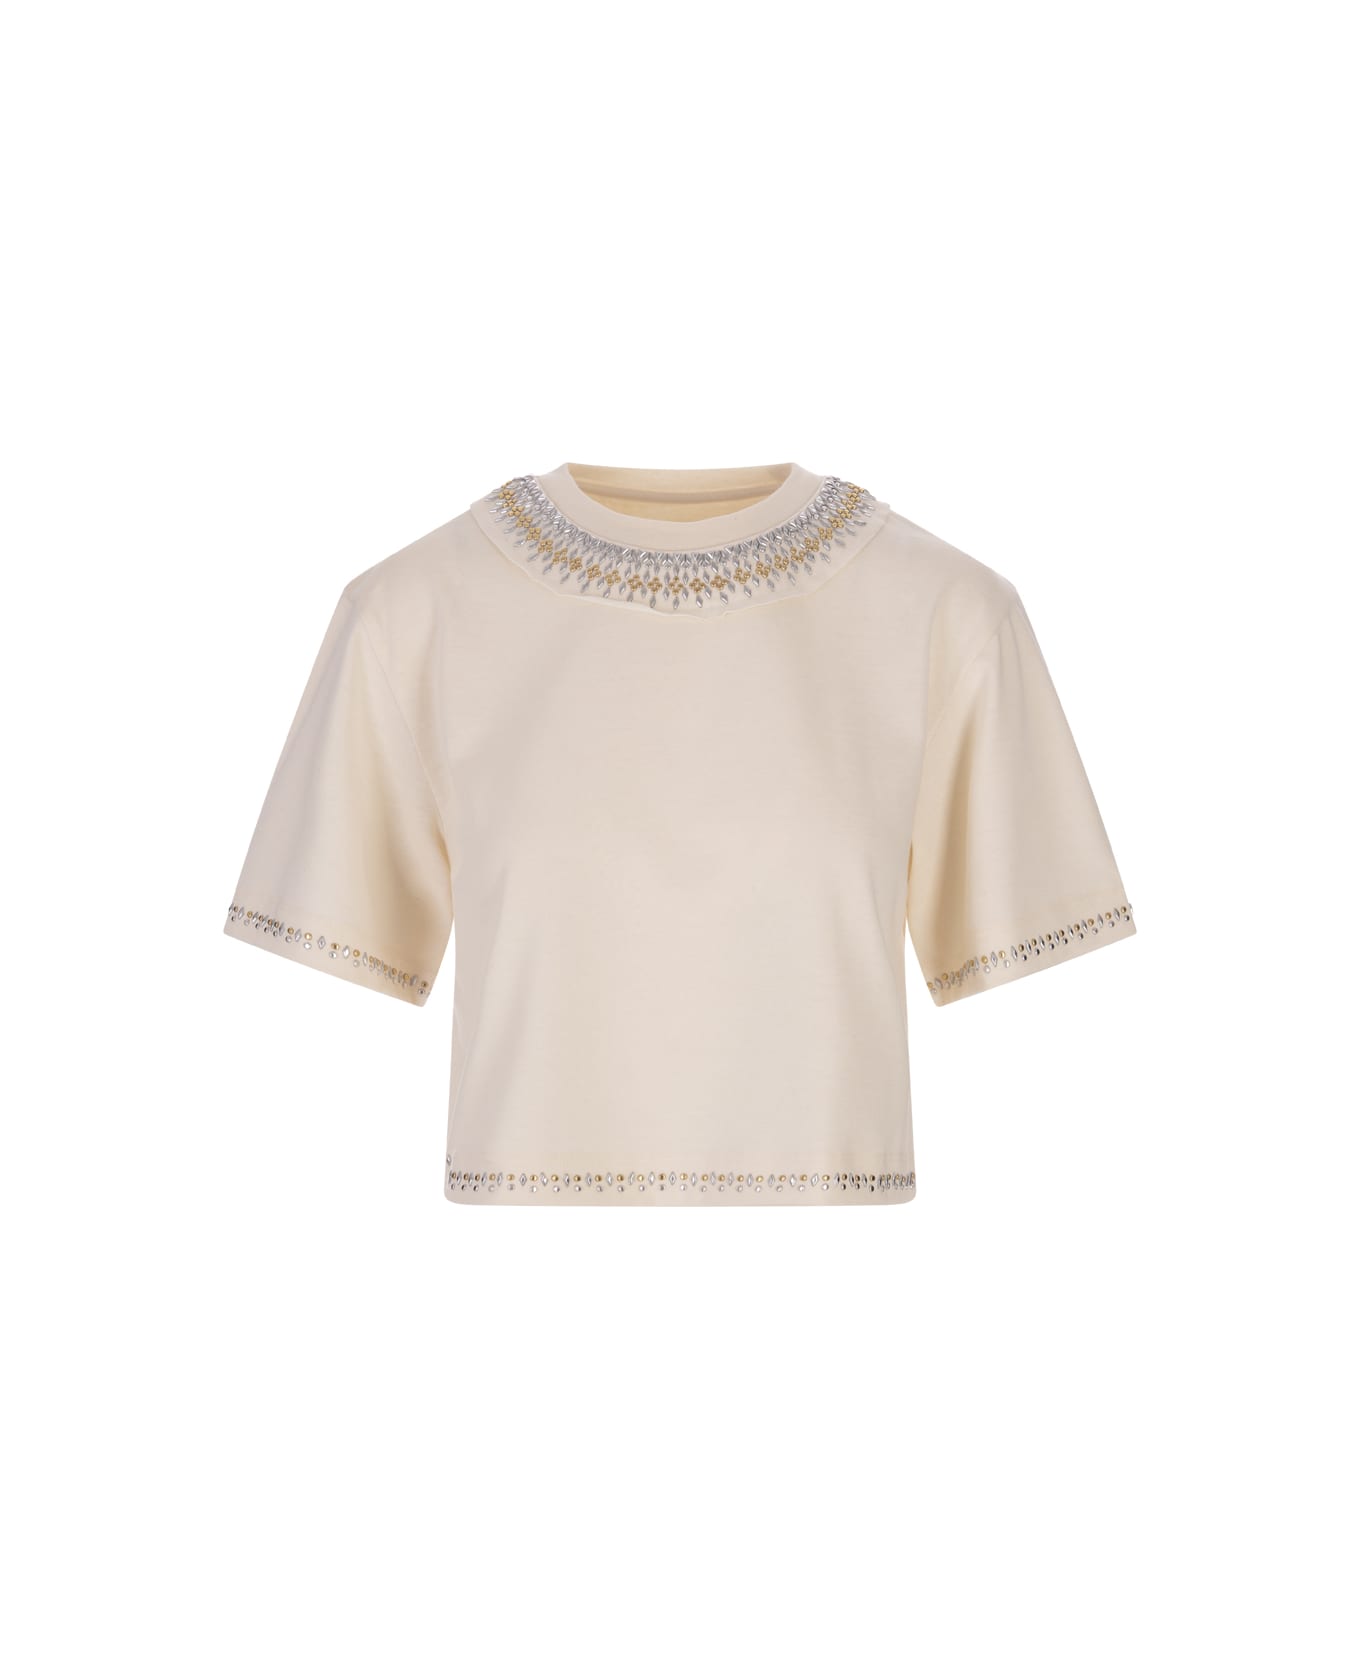 Paco Rabanne Nude Crop T-shirt With Rhinestones In Gold And Silver - White